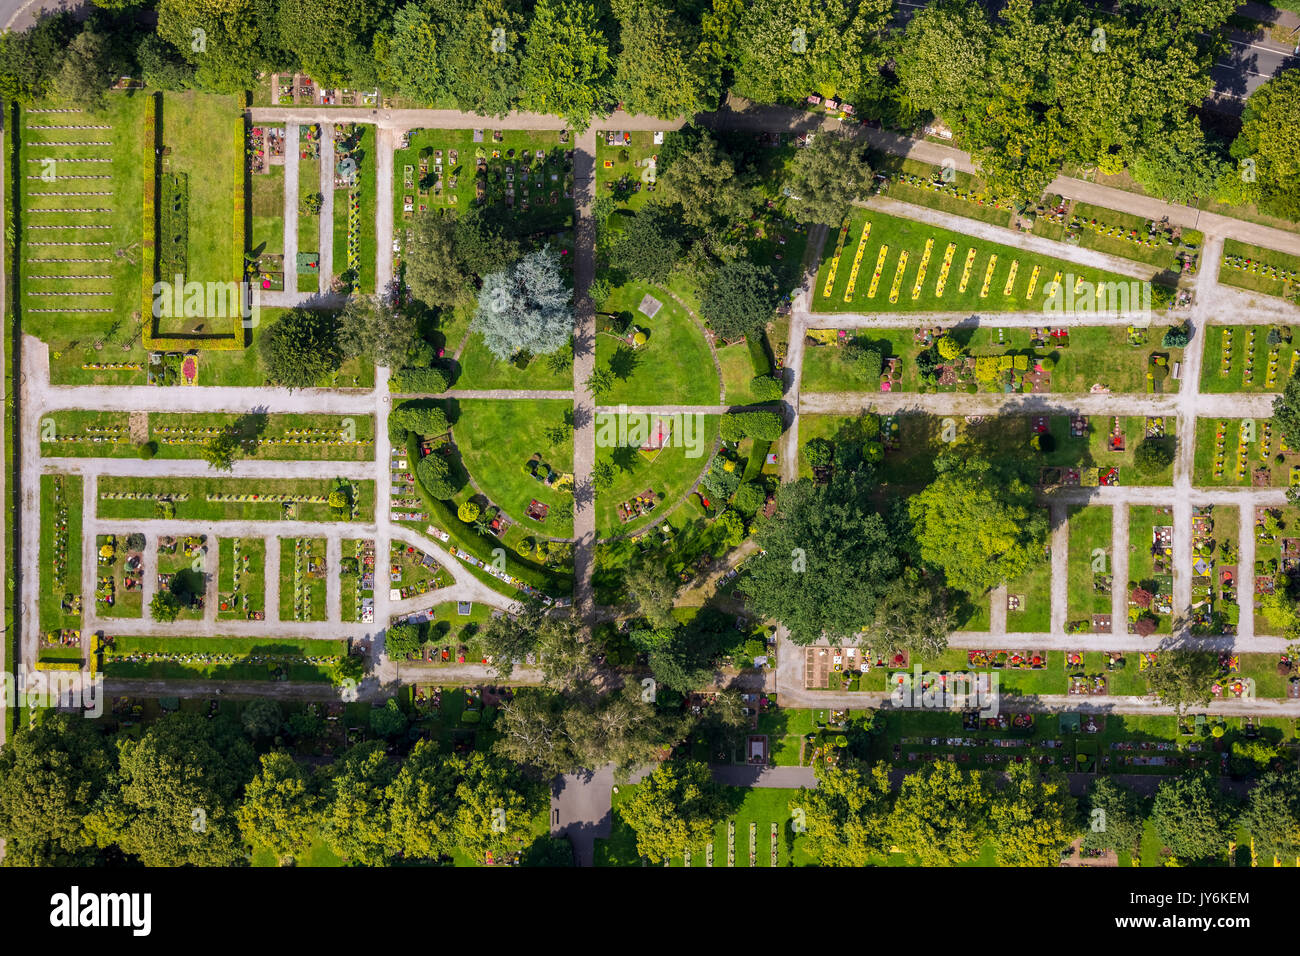 Cemetery urn graves, urn grave, flower beds, cemetery planting, Gladbeck, Ruhr area, North Rhine-Westphalia, Germany, Europe, Gladbeck, aerial view, a Stock Photo